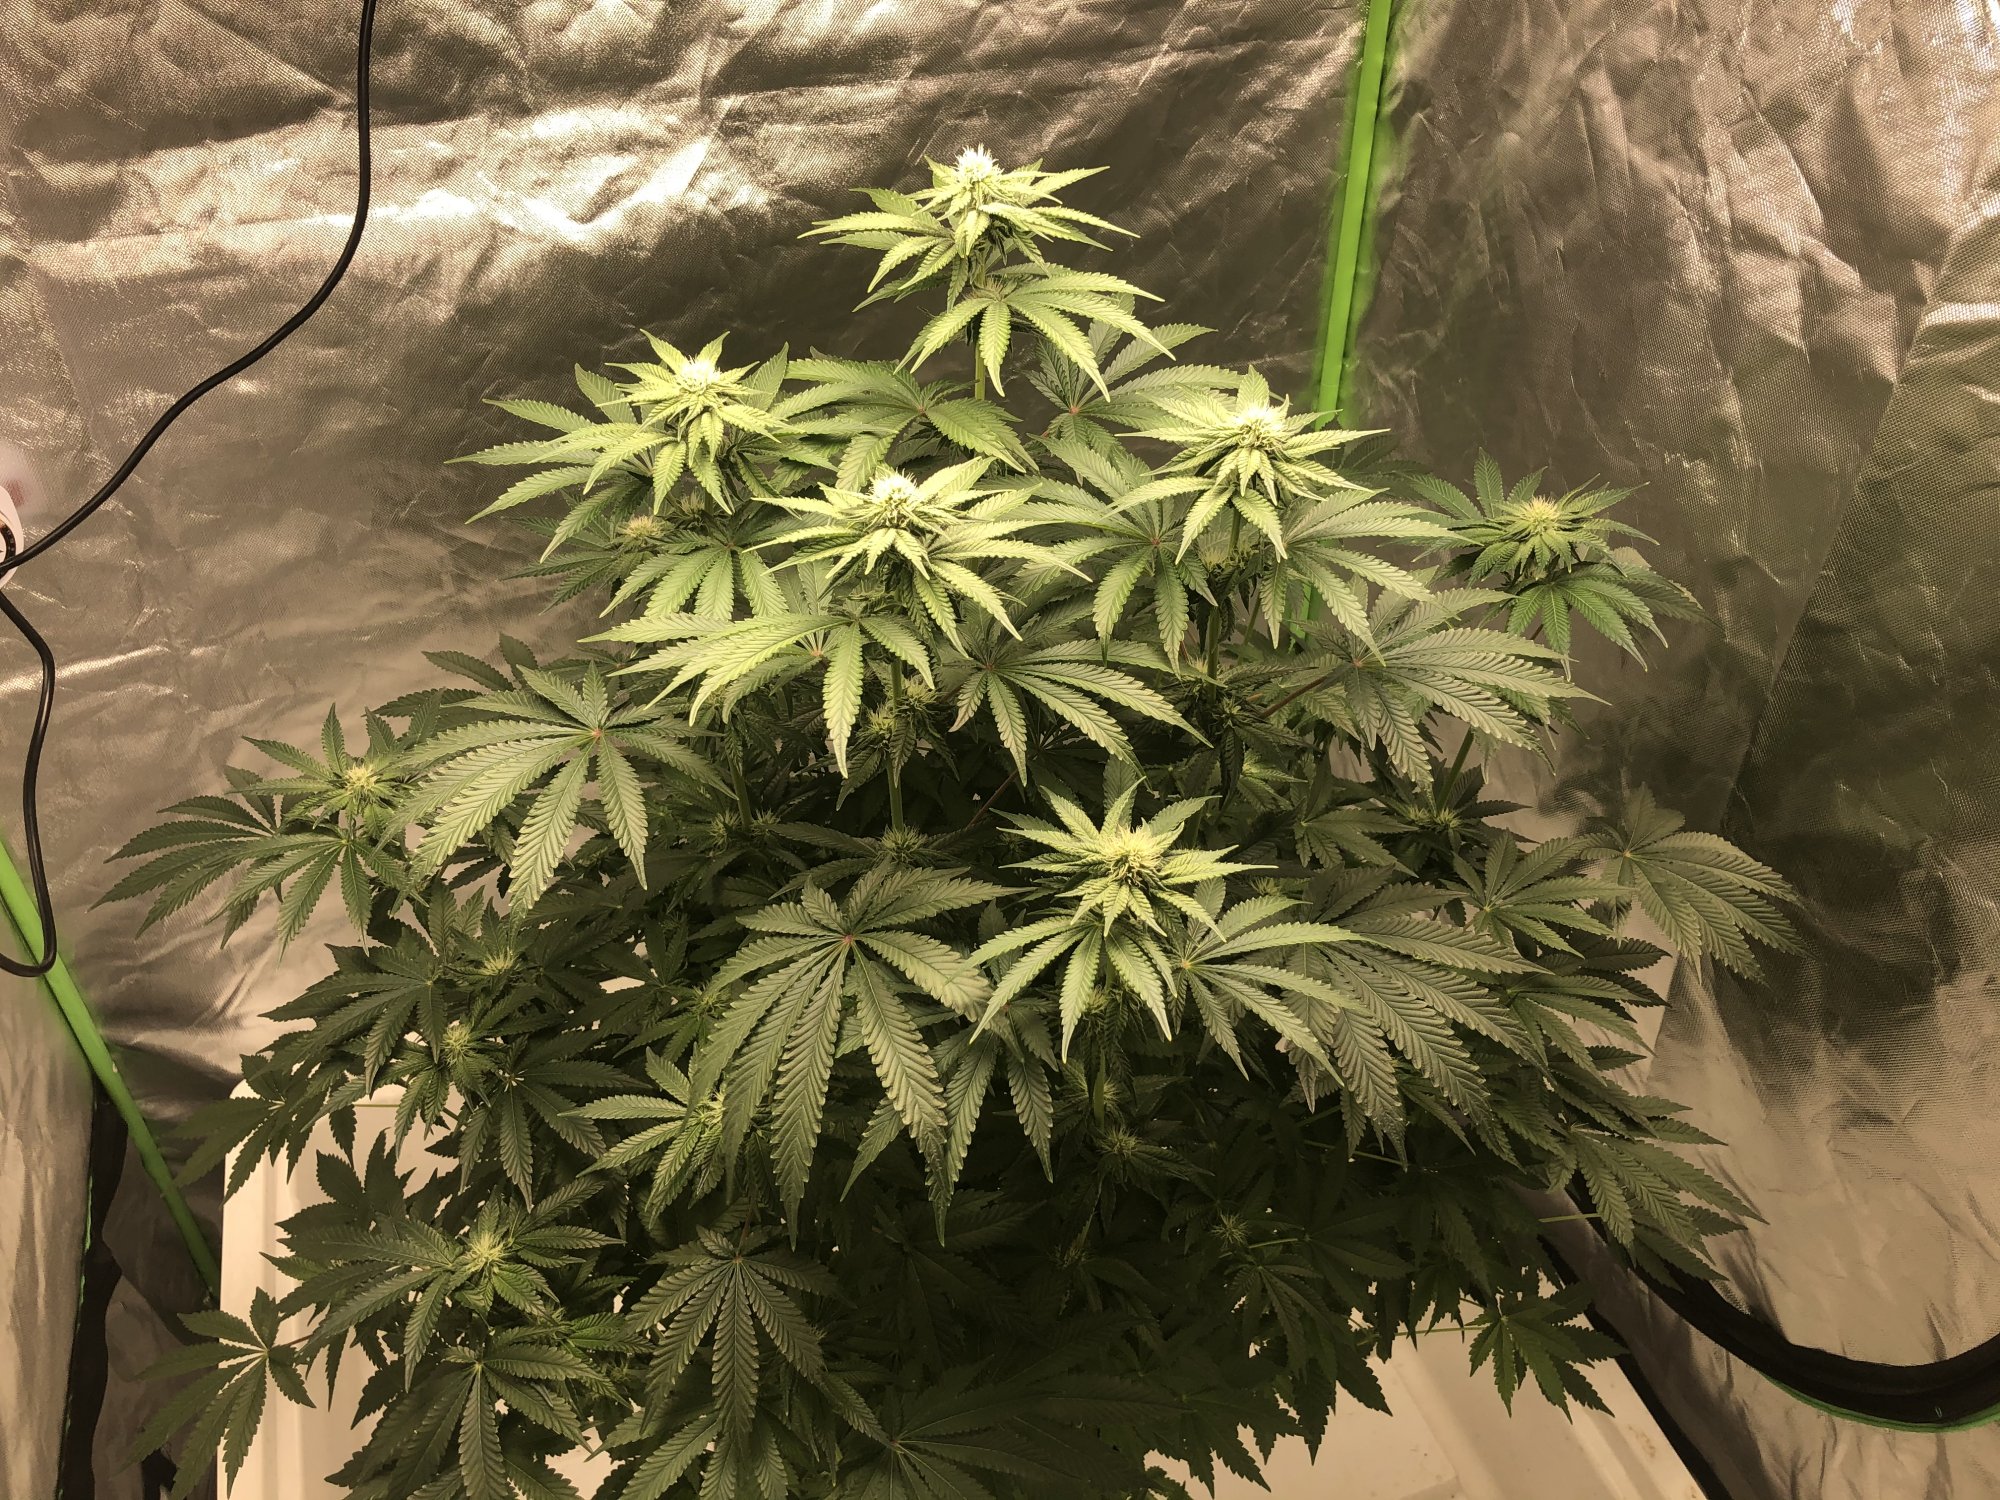 My 1 plant left what should i do